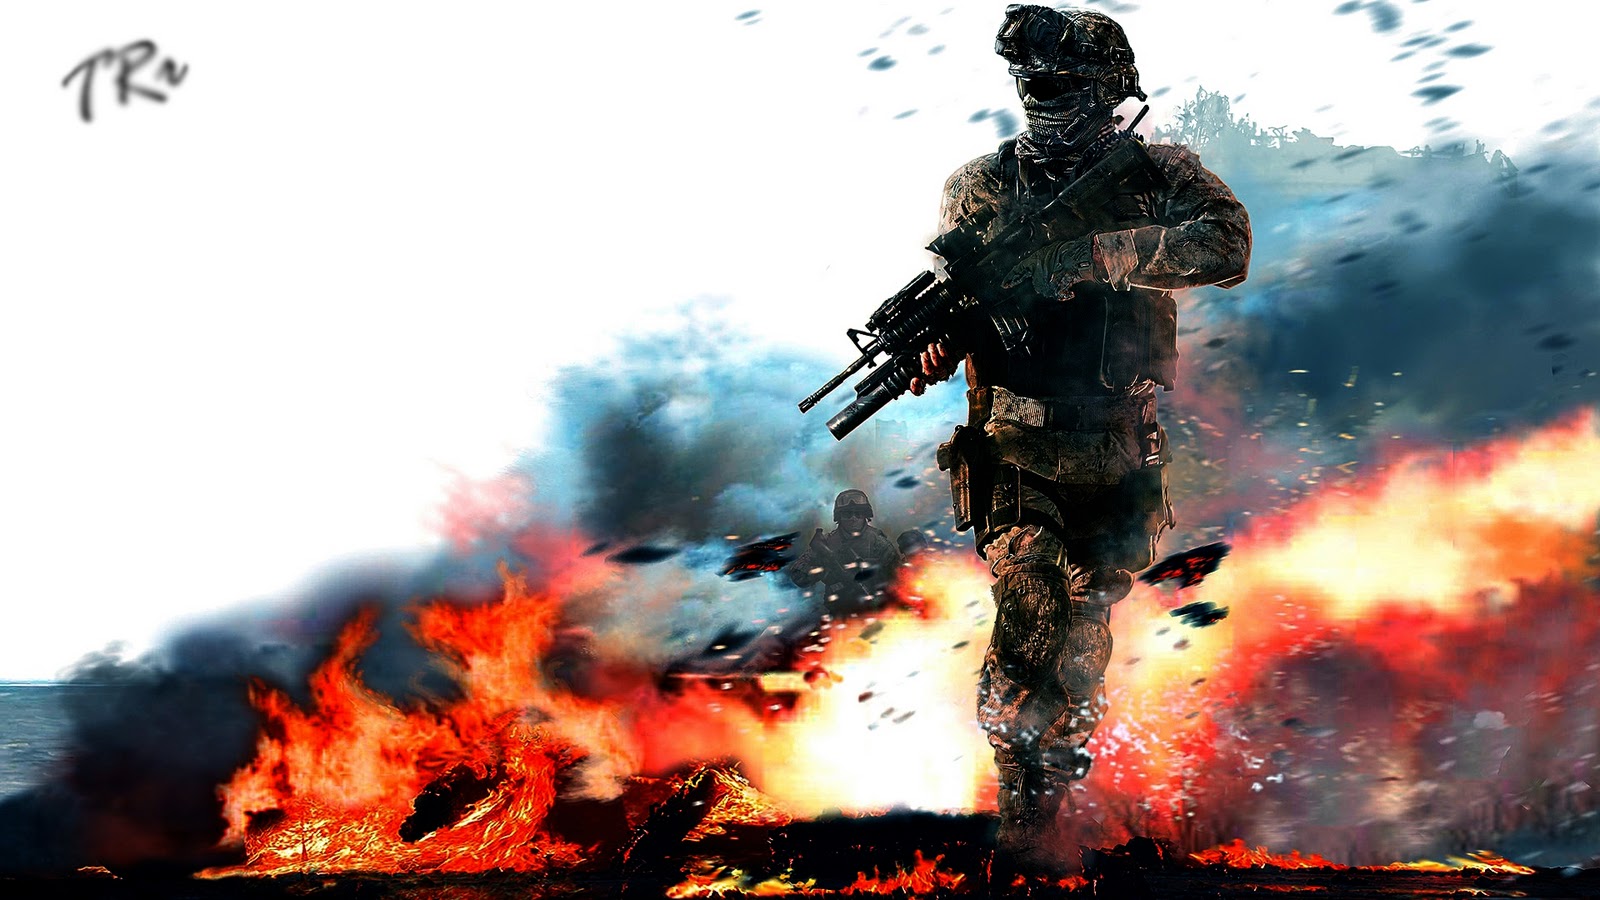 Call of Duty Black Ops HD Wallpapers 1900x1200 Download Free